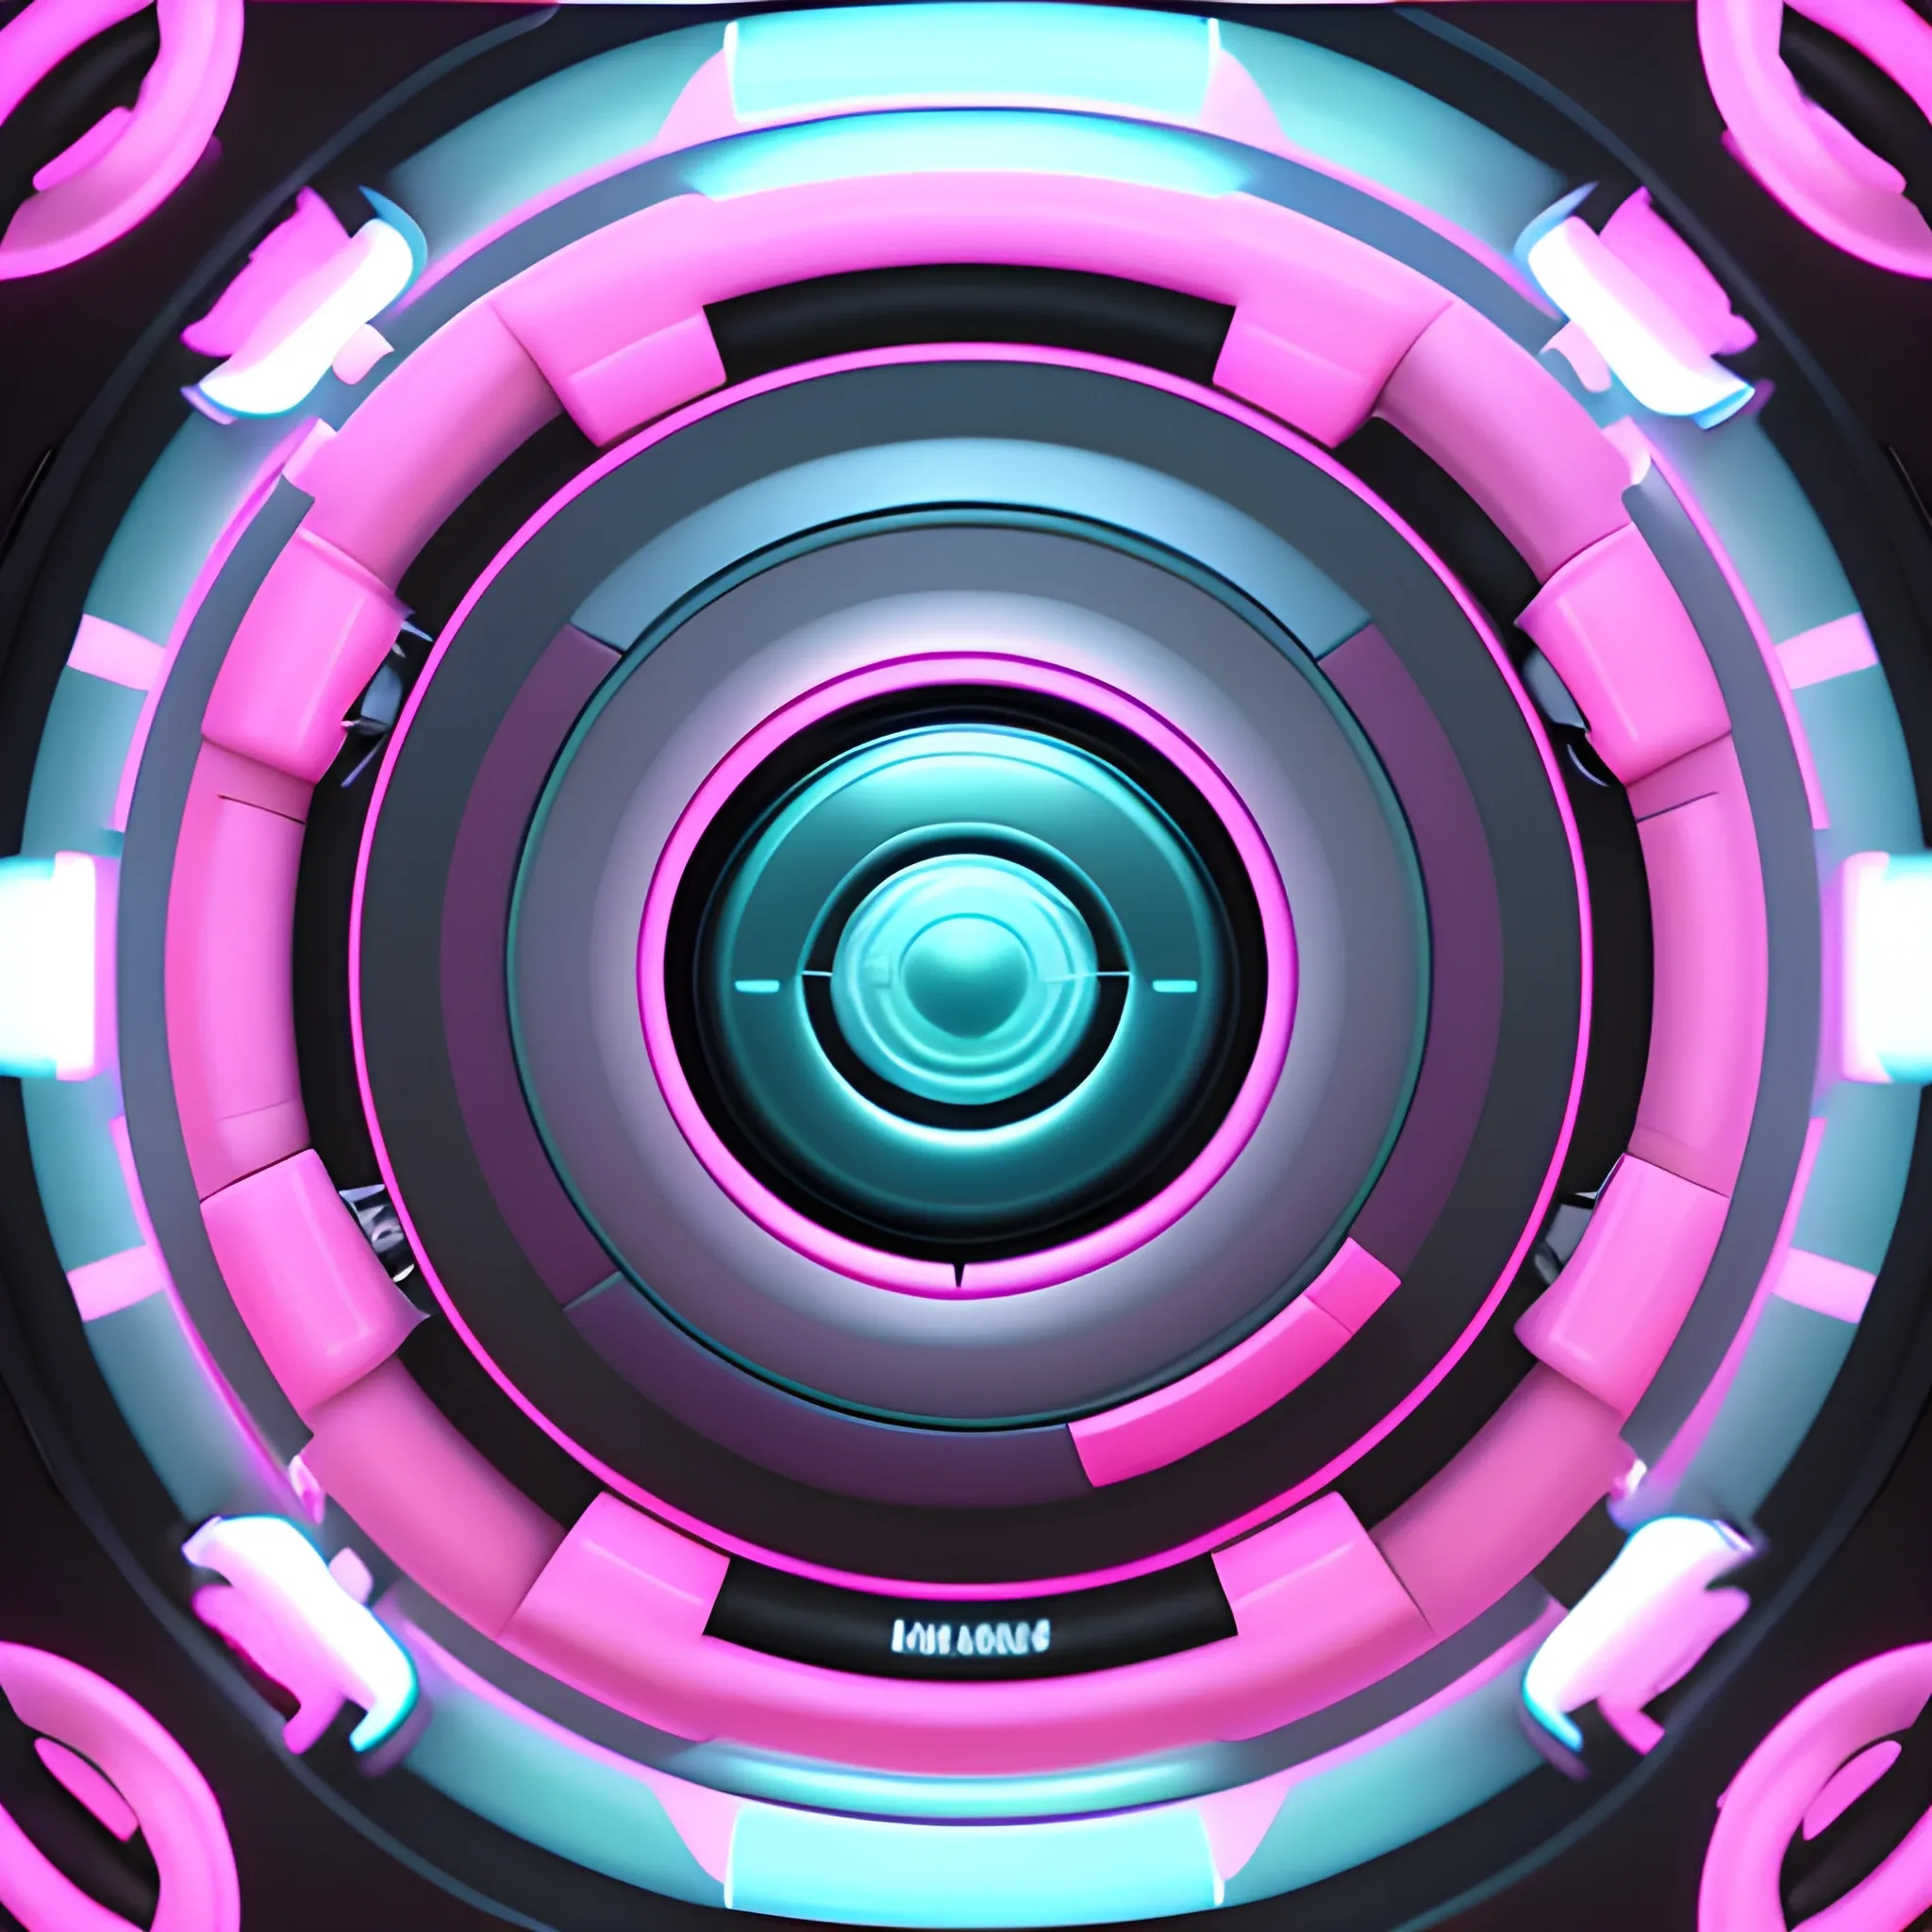 3D, Sci-Fi, Hip-hop, Urban, pink and cyan colored, circular avatar. high-definition, realistic, intricate detailing, embossed circular subwoofer frame, black circle centered inside, transparent background